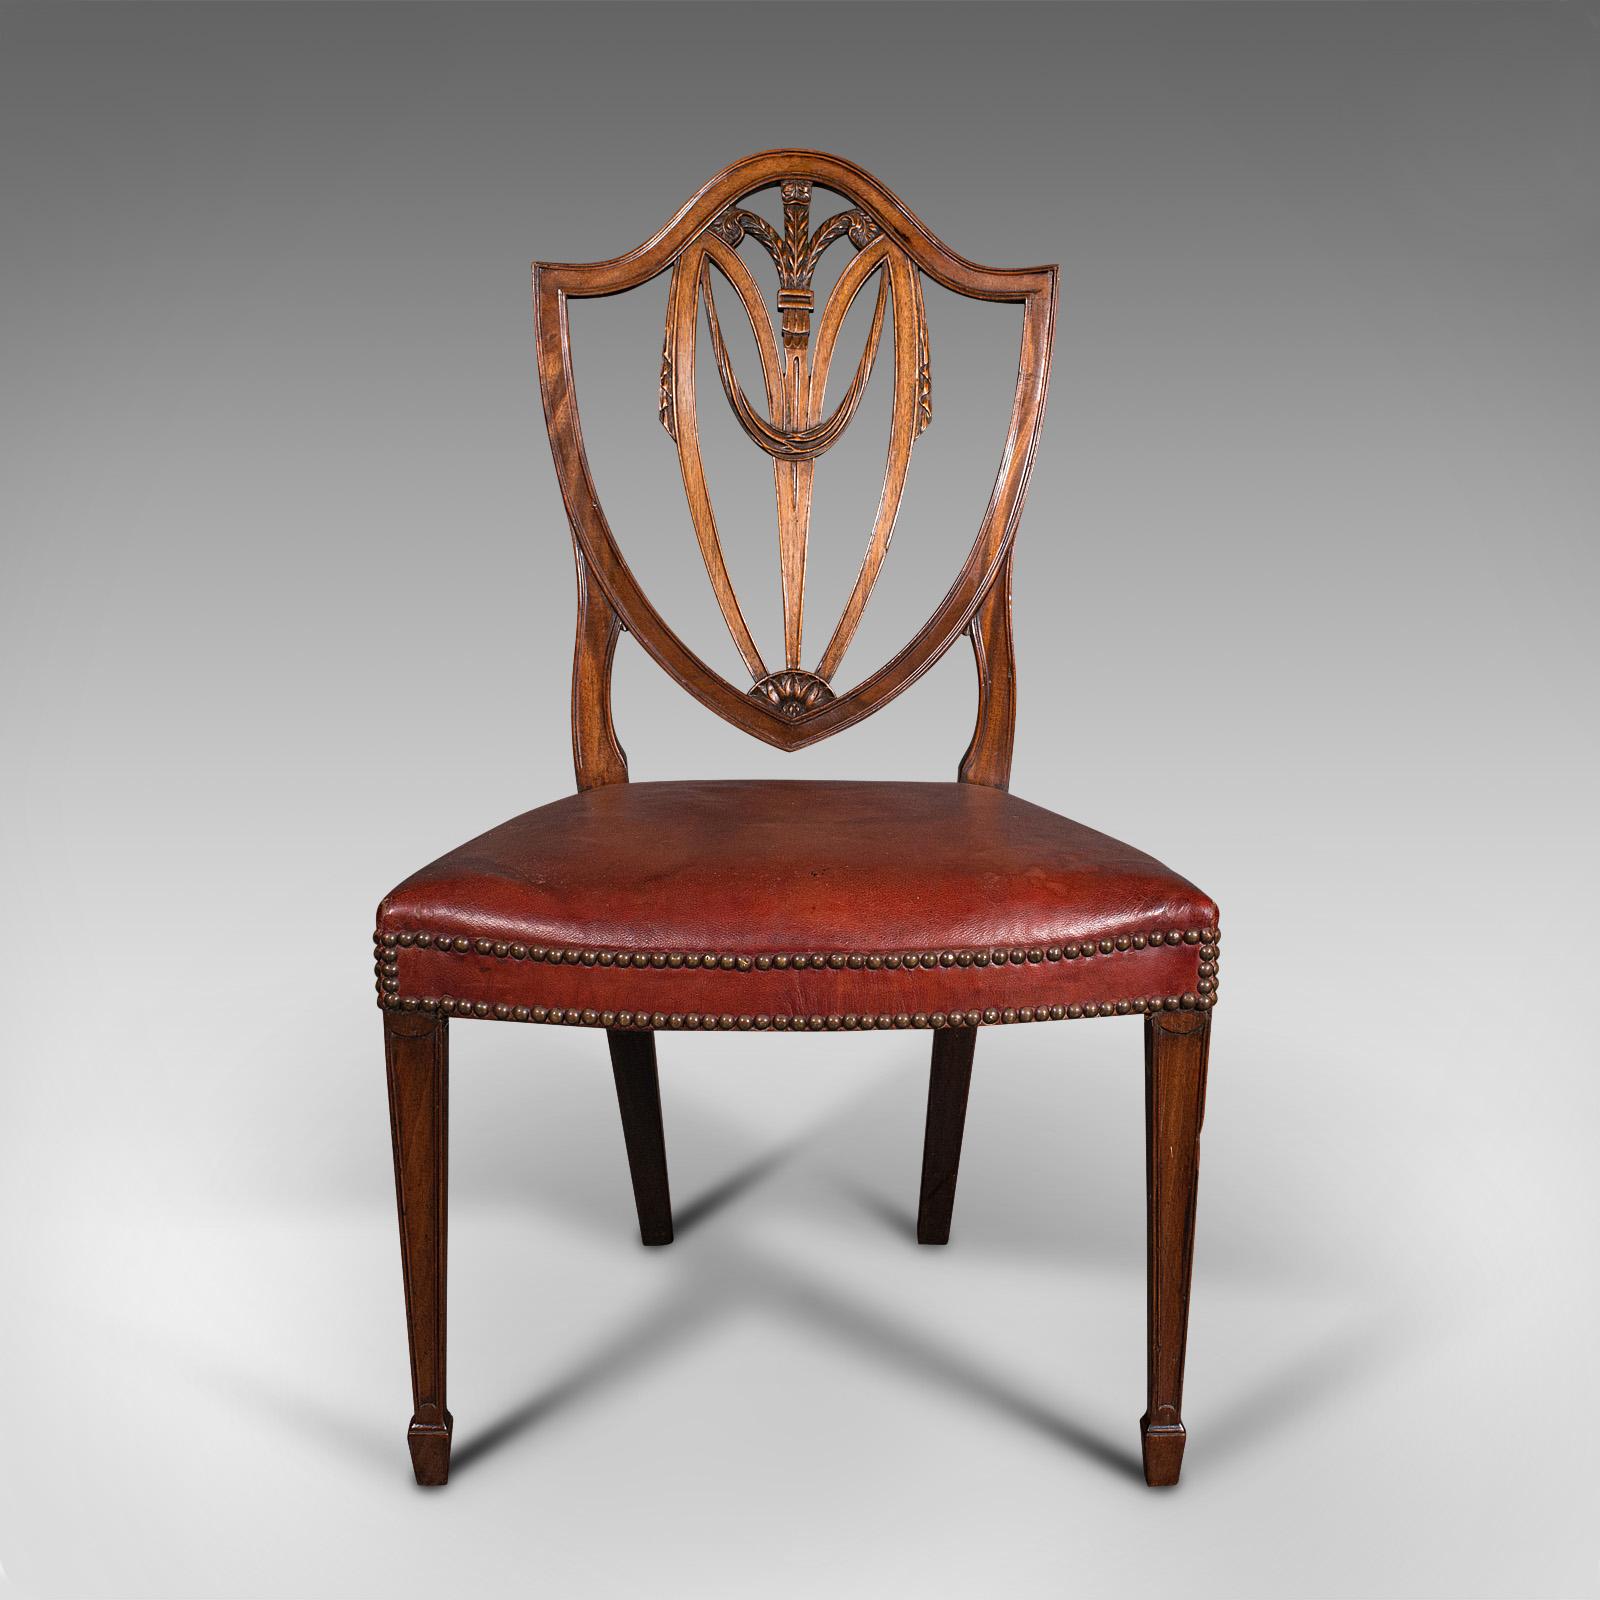 This is a set of 6 antique shield back chairs. An English, mahogany and leather dining seat with Hepplewhite taste, dating to the Georgian period, circa 1800.

Enhance your dining experience with six superb chairs
Displaying a desirable aged